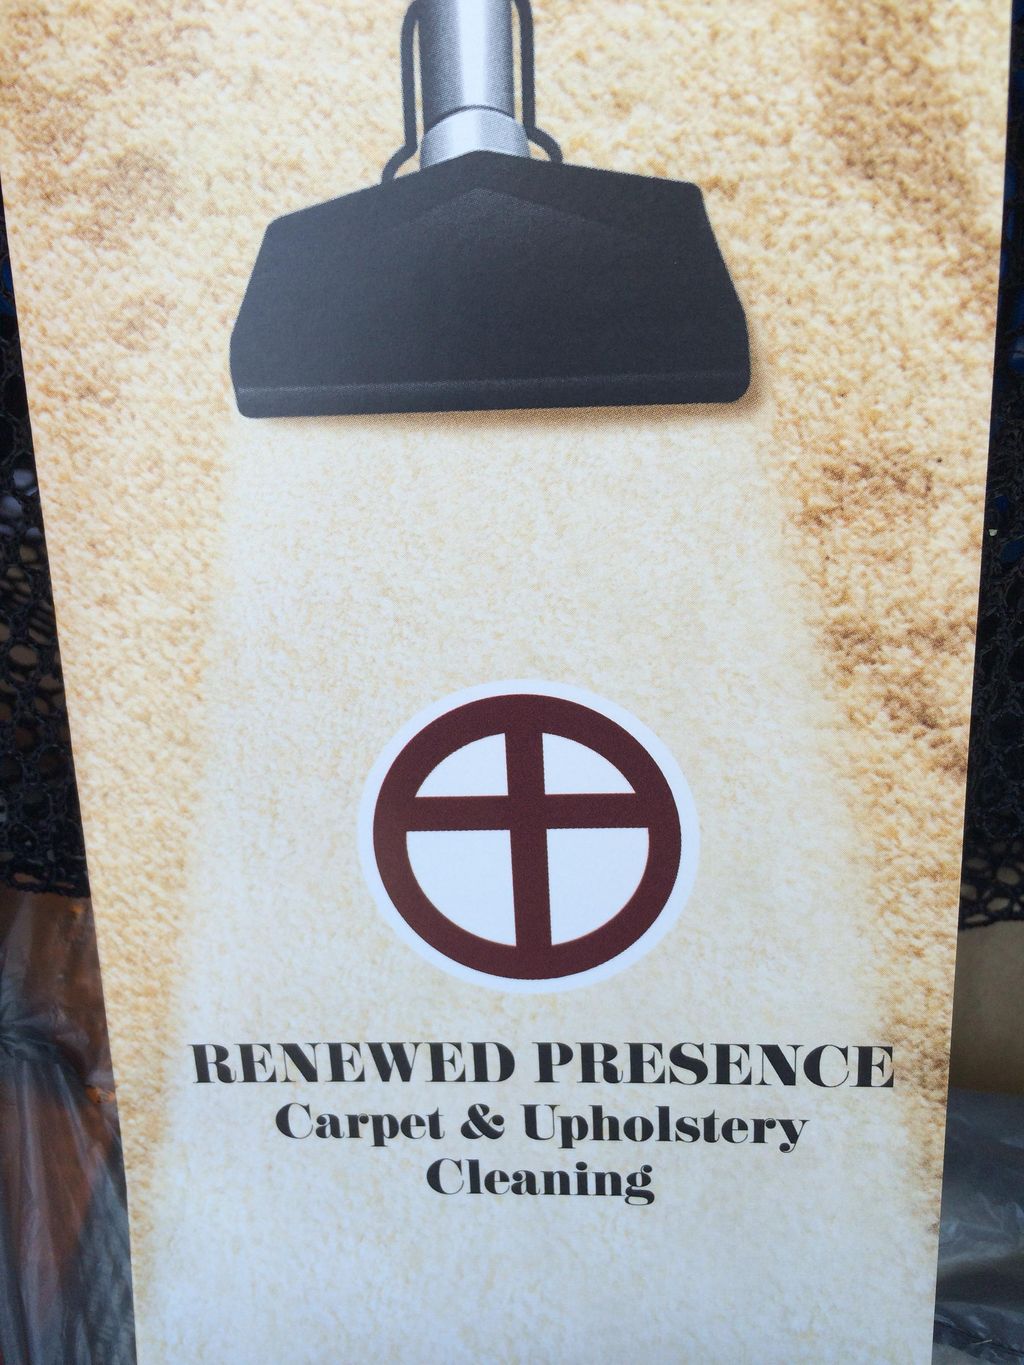 Renewed Presence Carpet & Upholstery cleaning